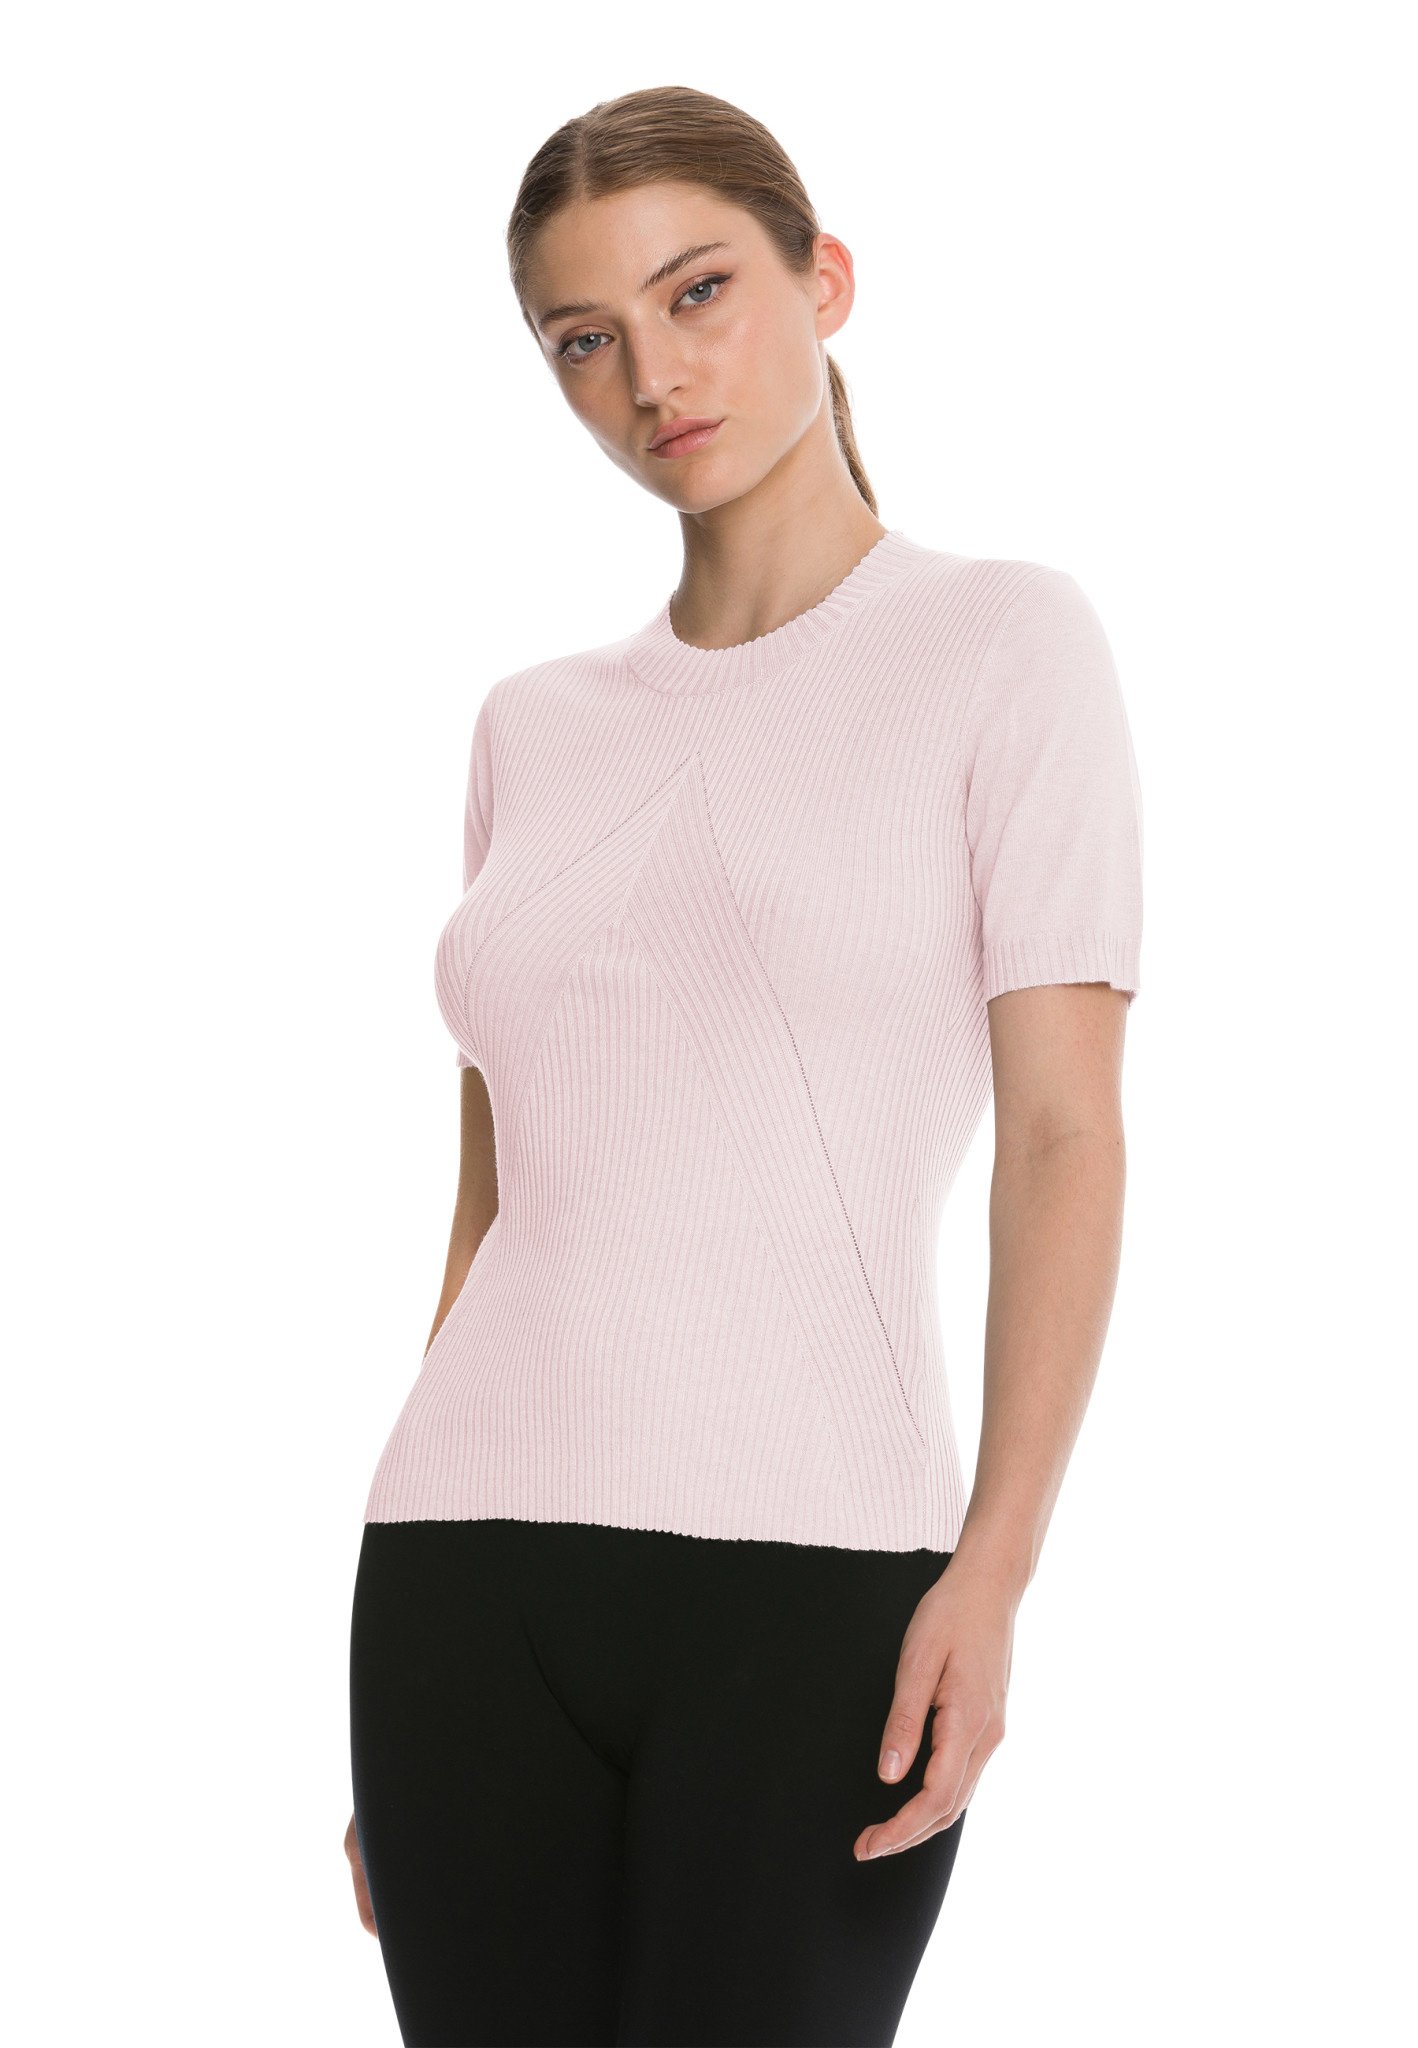 WOLFORD 52915 Cashmere Top Short Sleeves